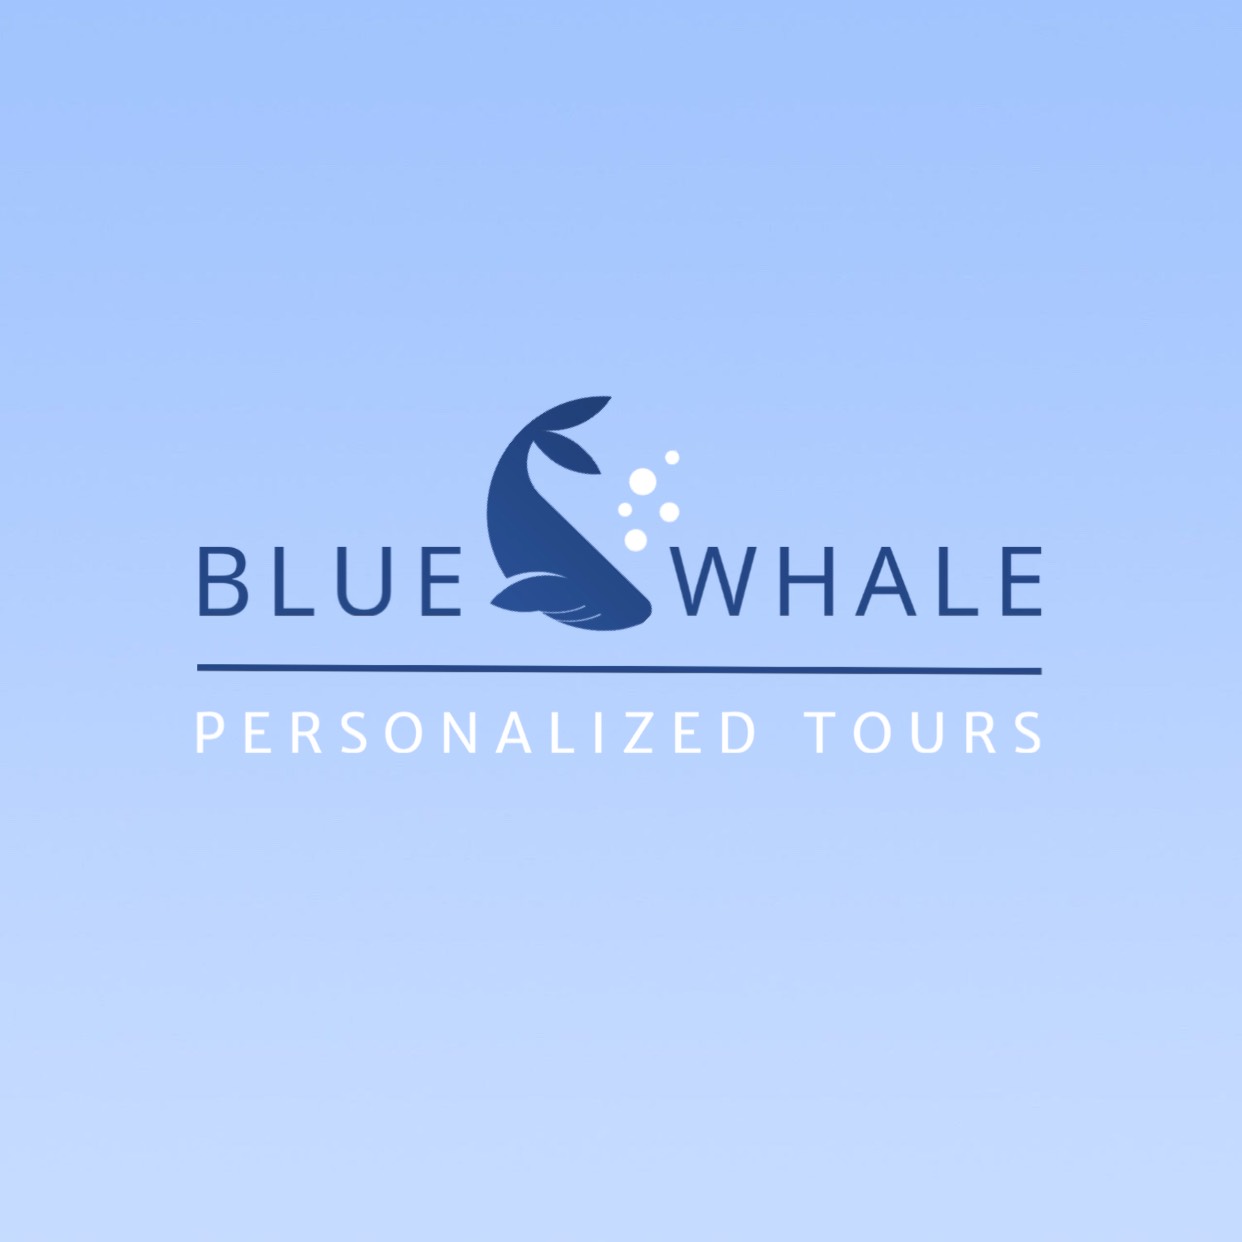 Blue whale tourguide business logo template